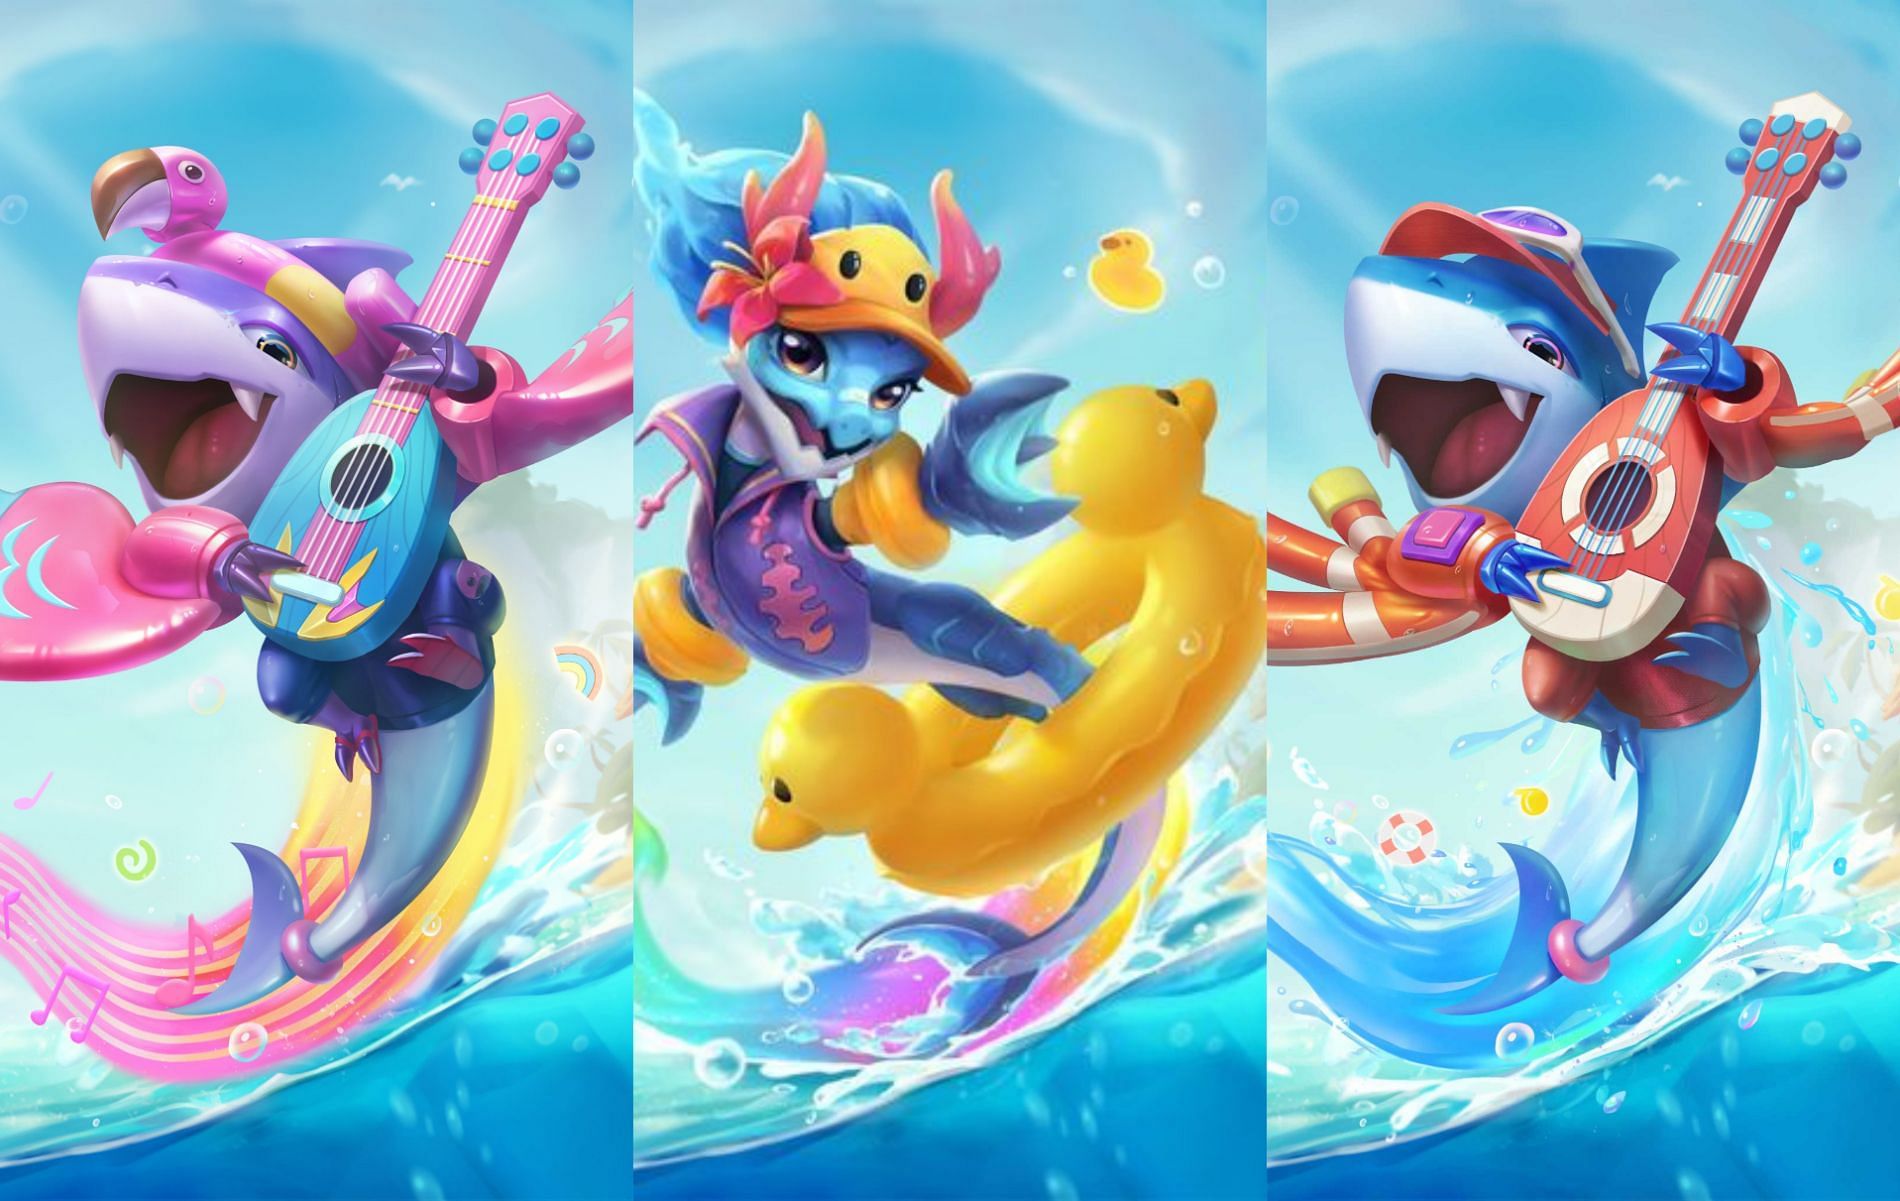 New Pool Party Umbra Variants and Mythic Ao Shin! - League of Legends